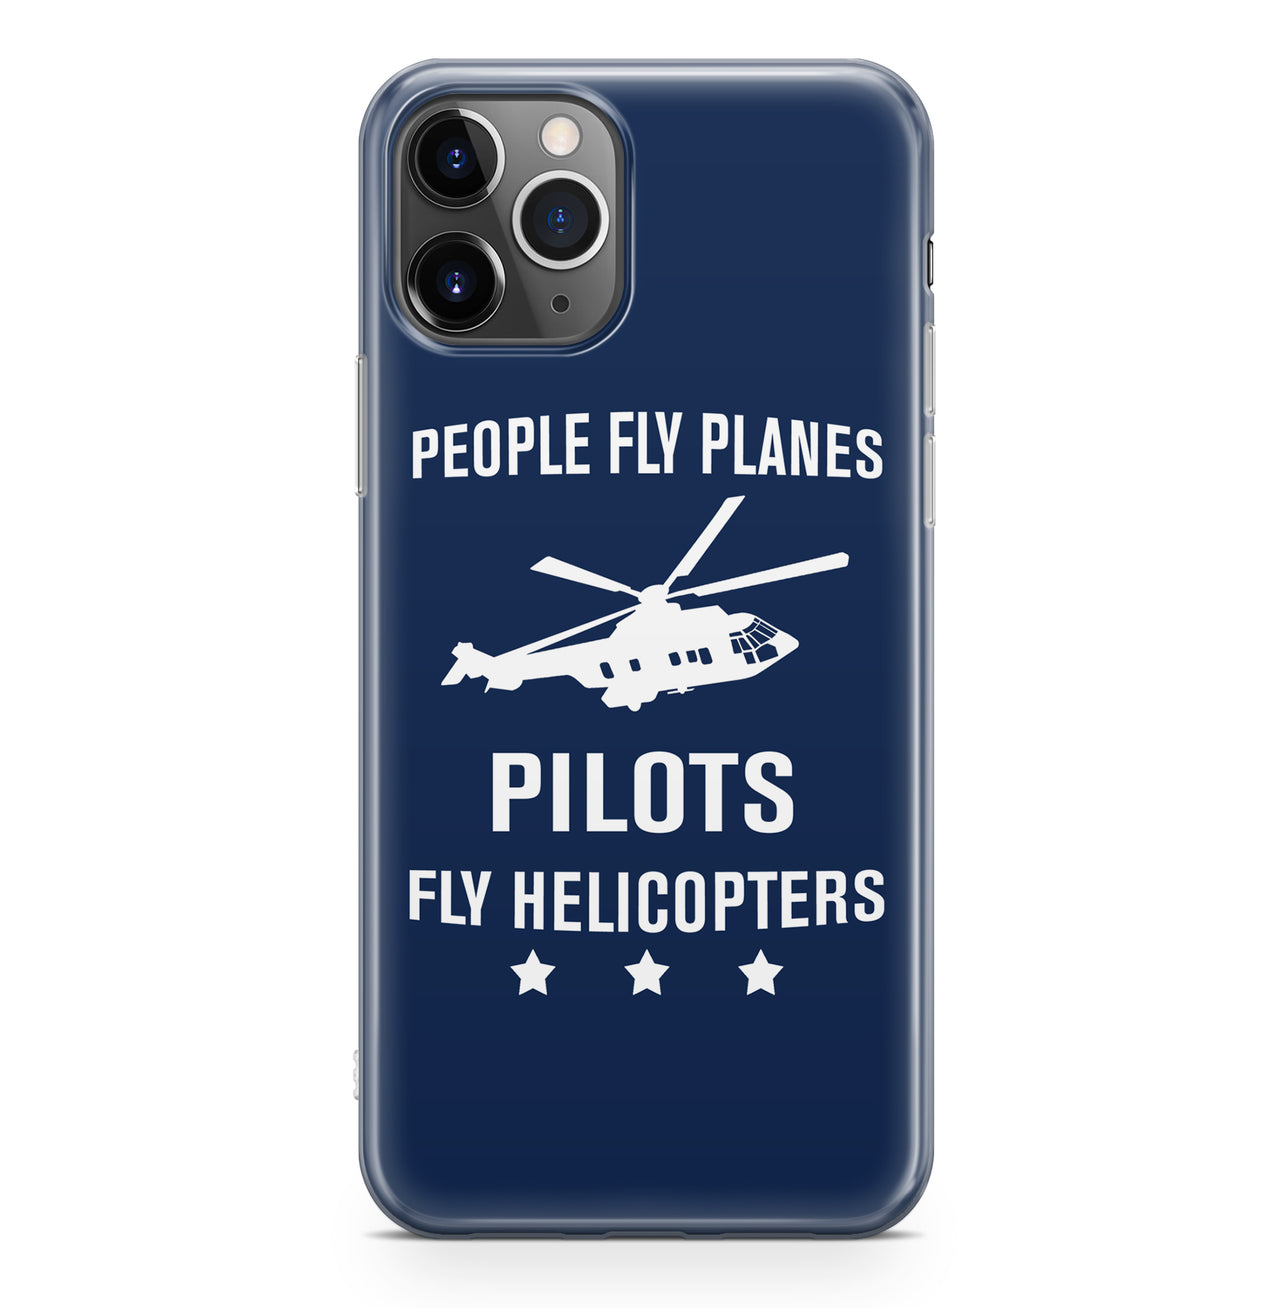 People Fly Planes Pilots Fly Helicopters Designed iPhone Cases